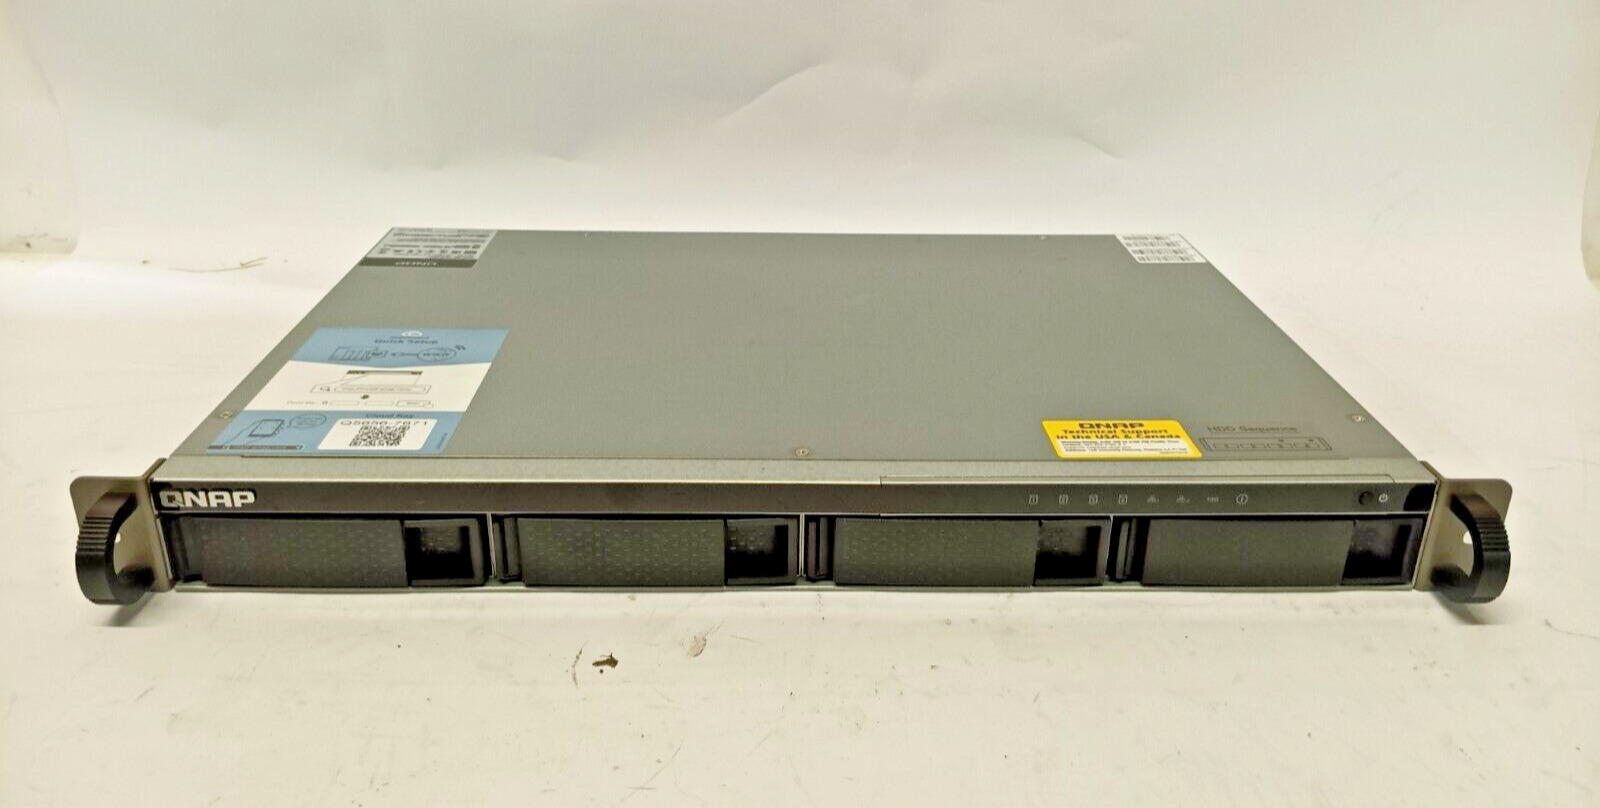 Used QNAP TS-431U-2G 4-Bay 1U Rack mount NAS No HDDs Tested for Power